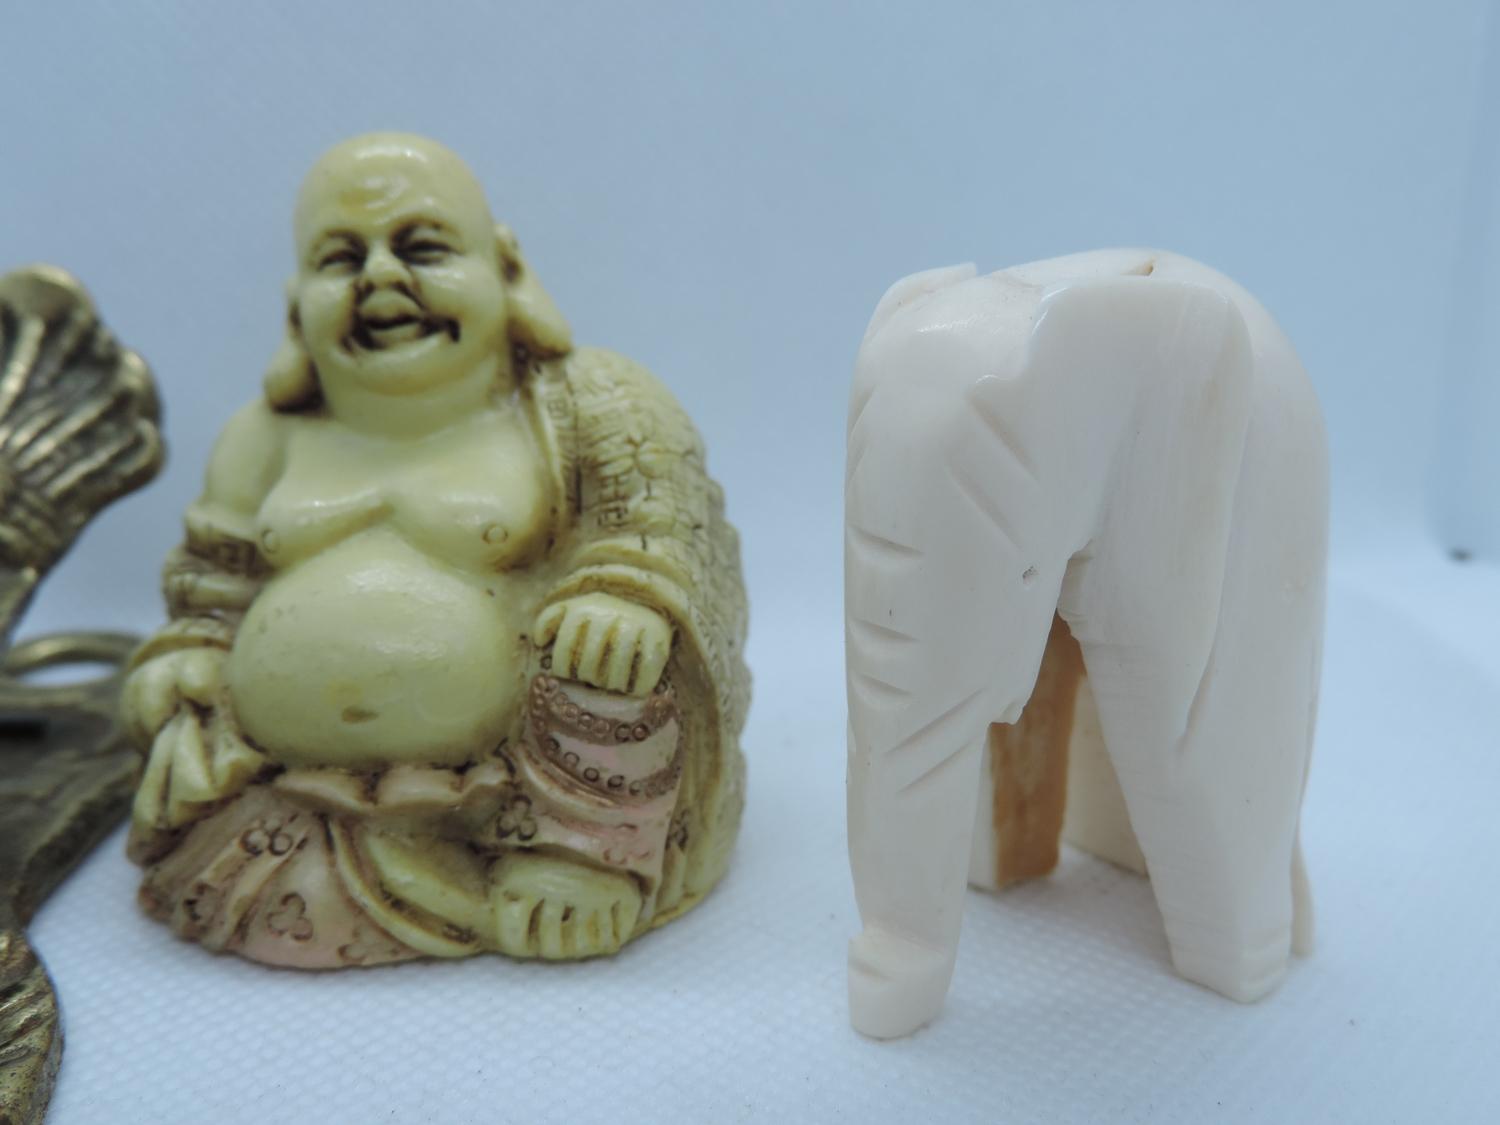 Brass Desk Clip, Carved Buddha Ornament and Small Elephant Ornament - Image 2 of 5